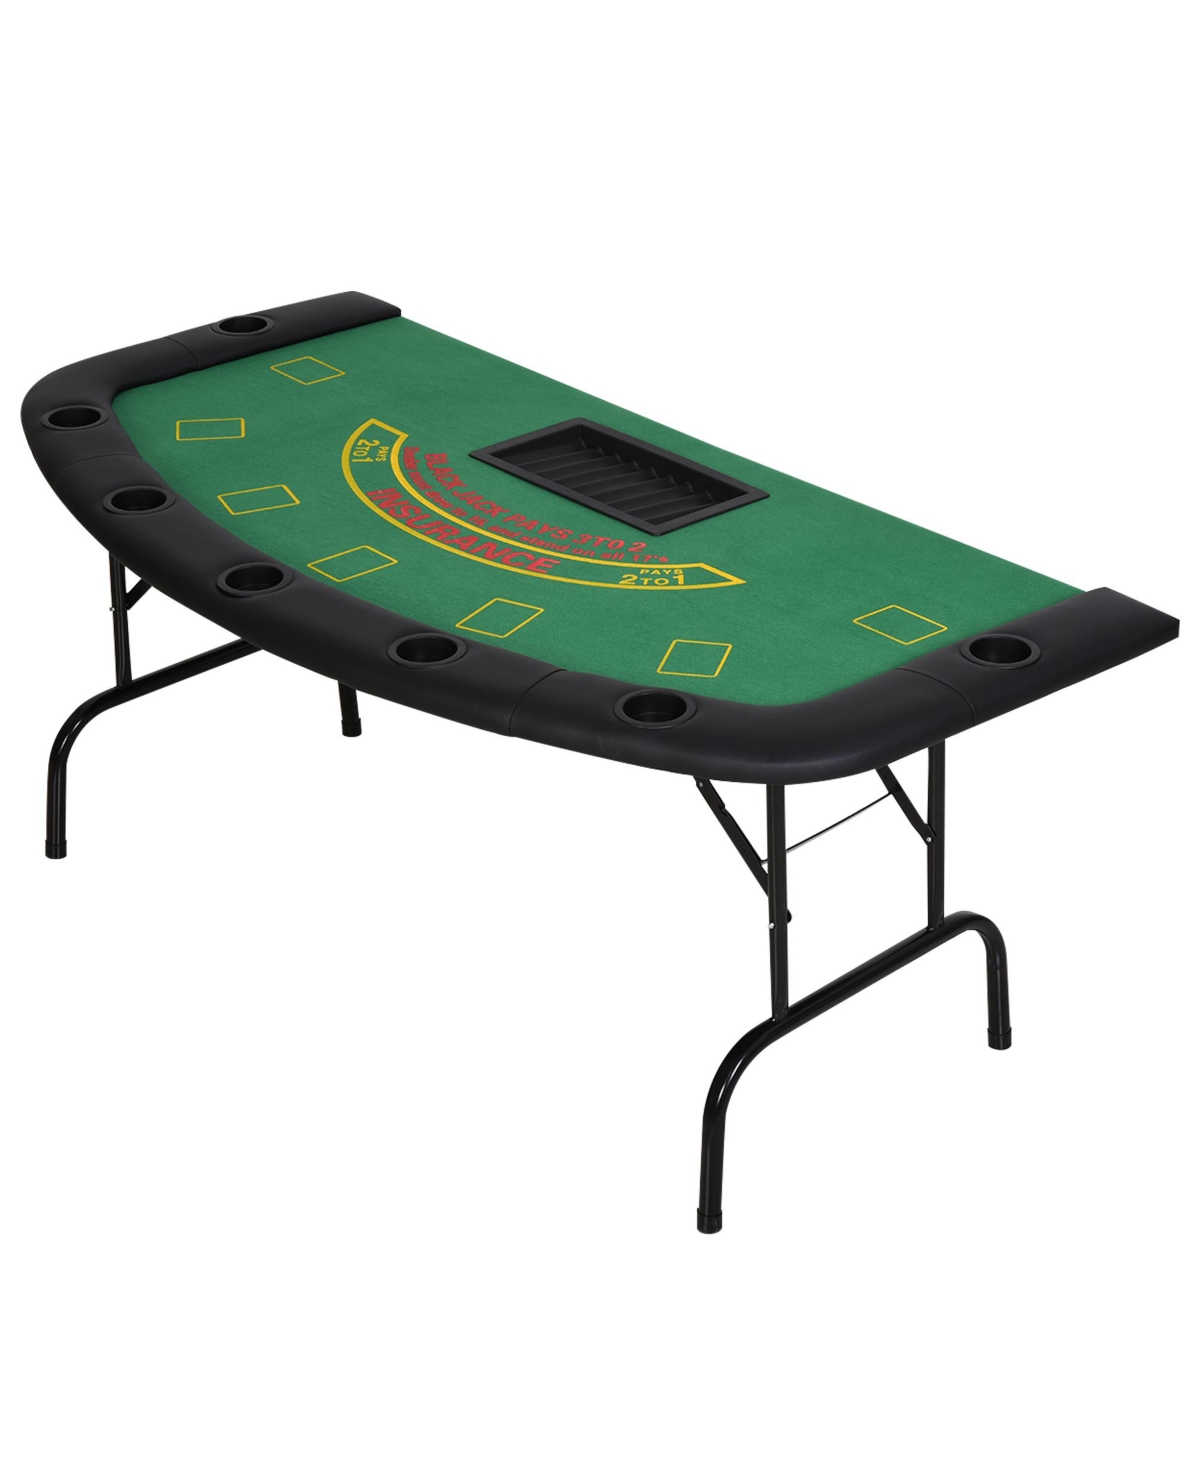 72" Foldable 7-Player Poker Blackjack Table with Chip & Cup Holder - Green Felt - Green